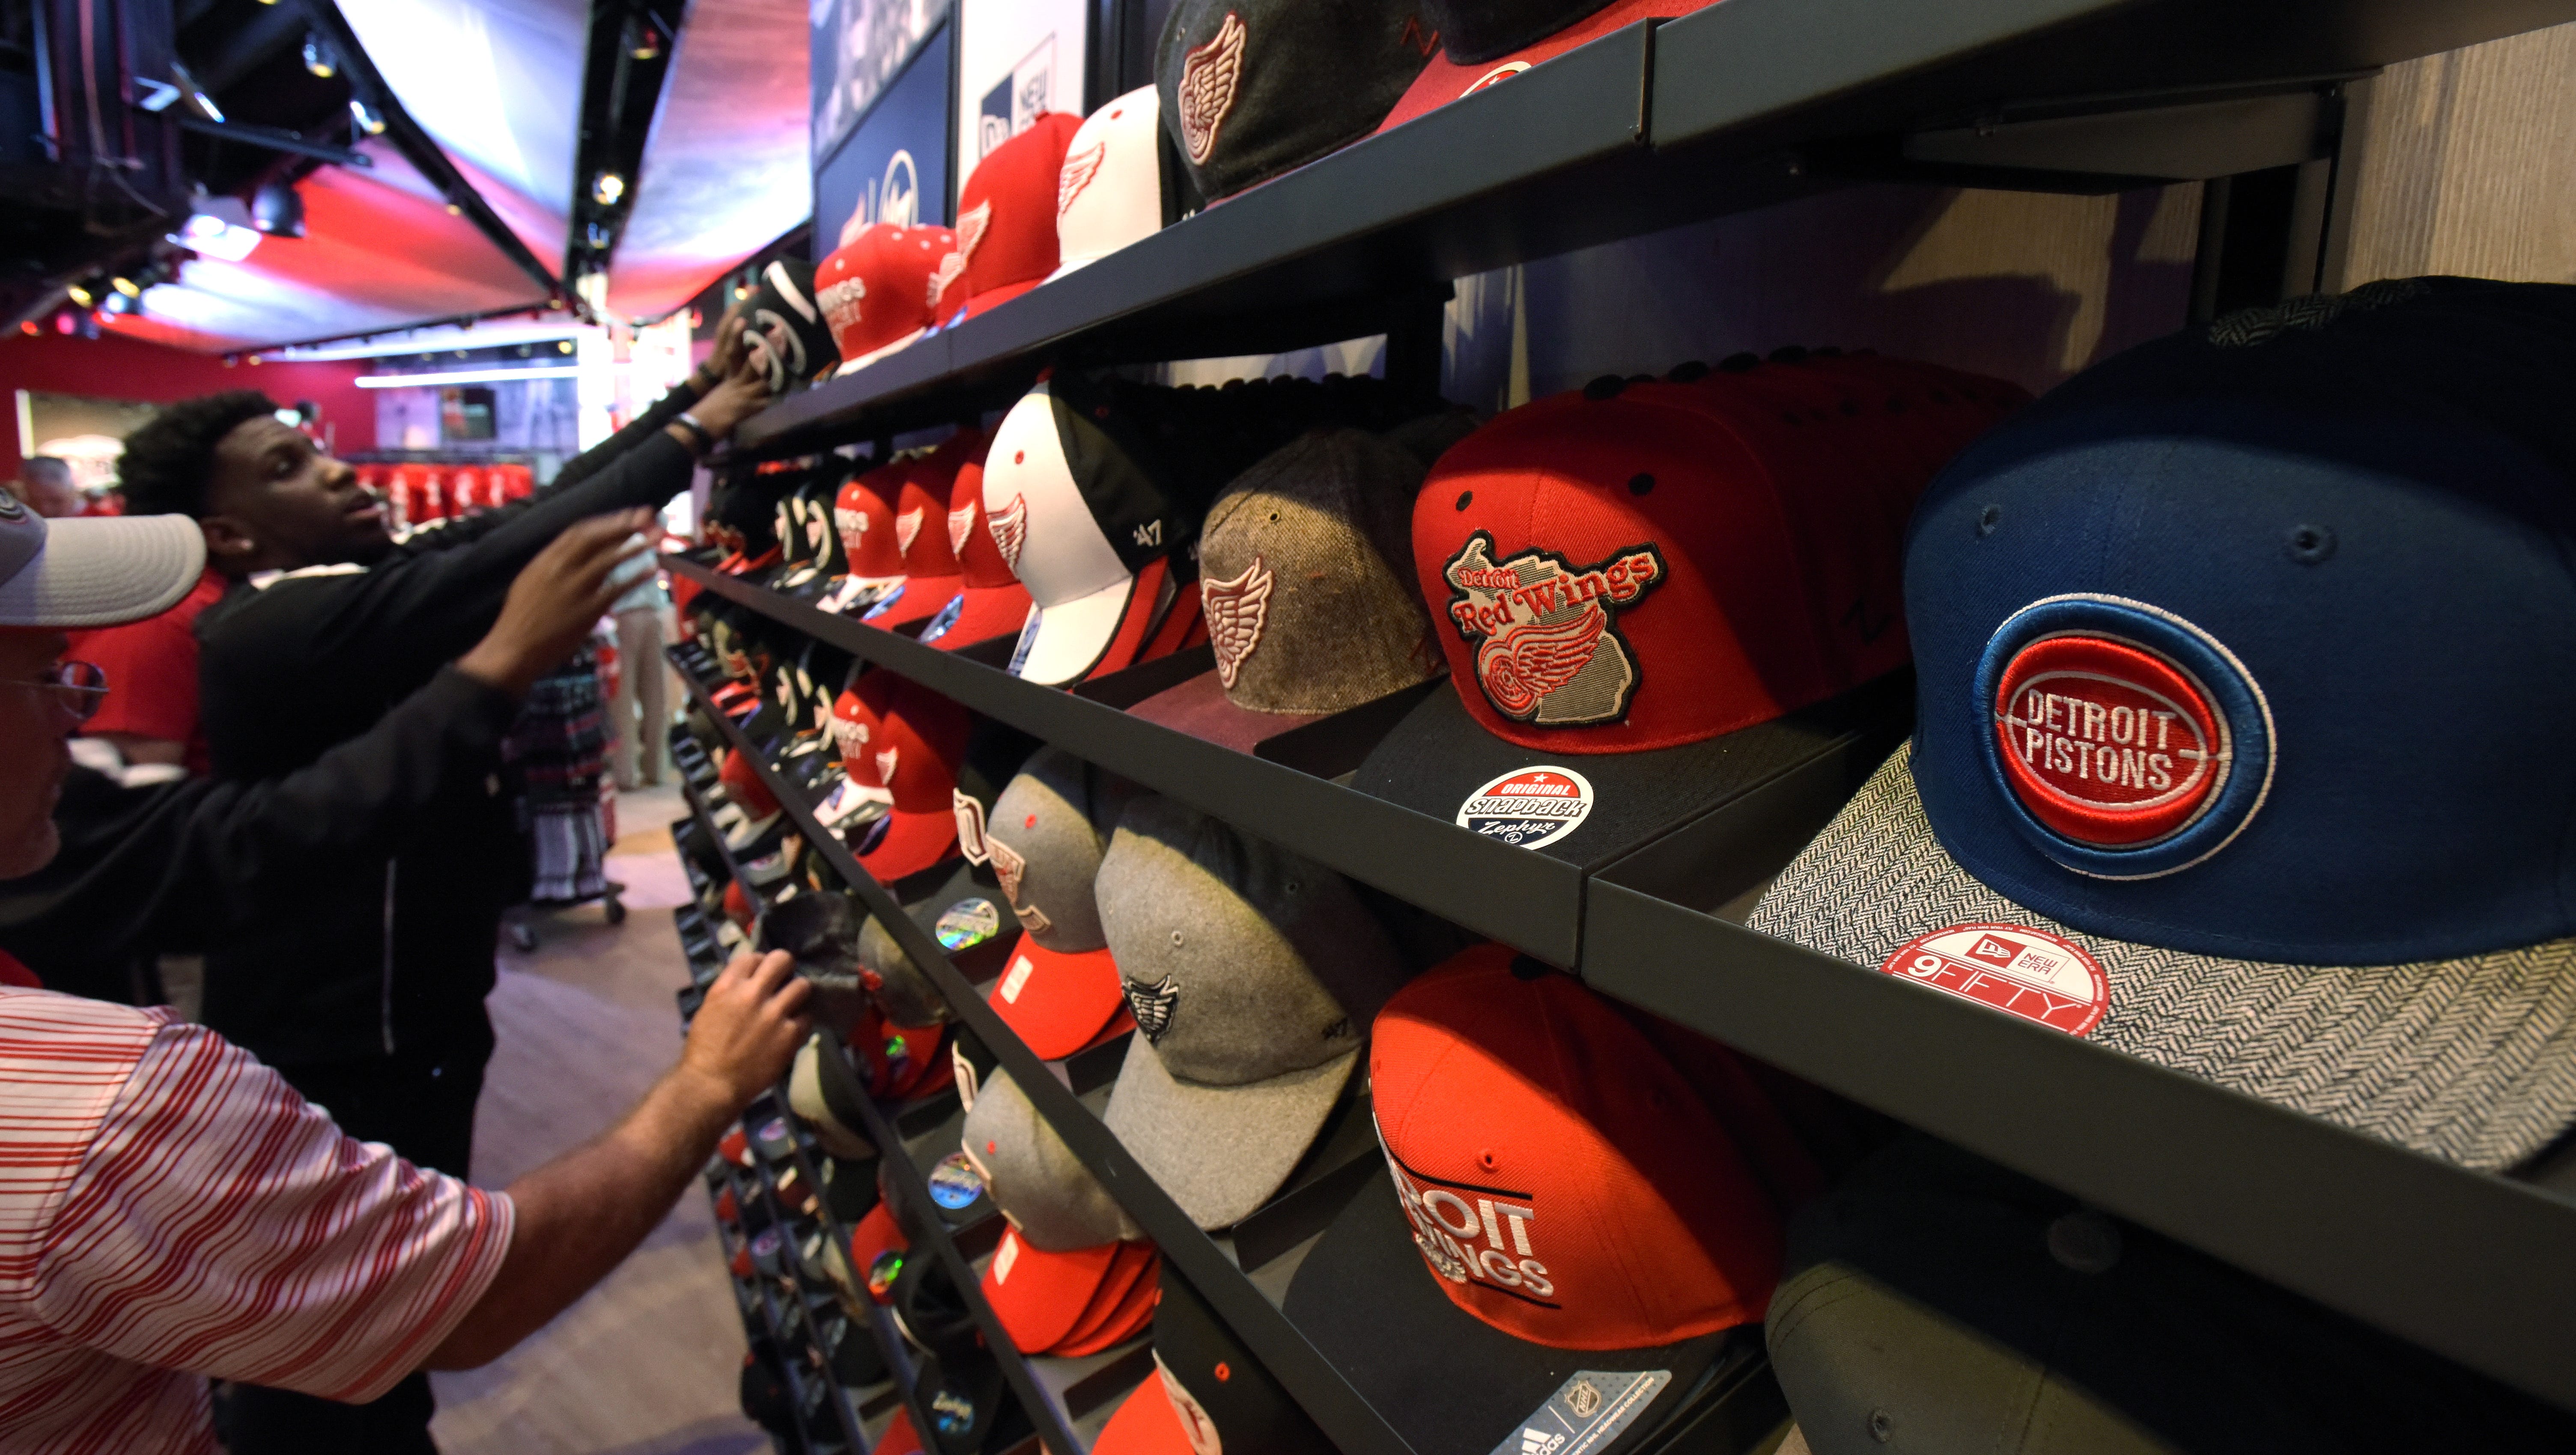 Fans check out Detroit Red Wings and Detroit Pistons in the main merchandise store.